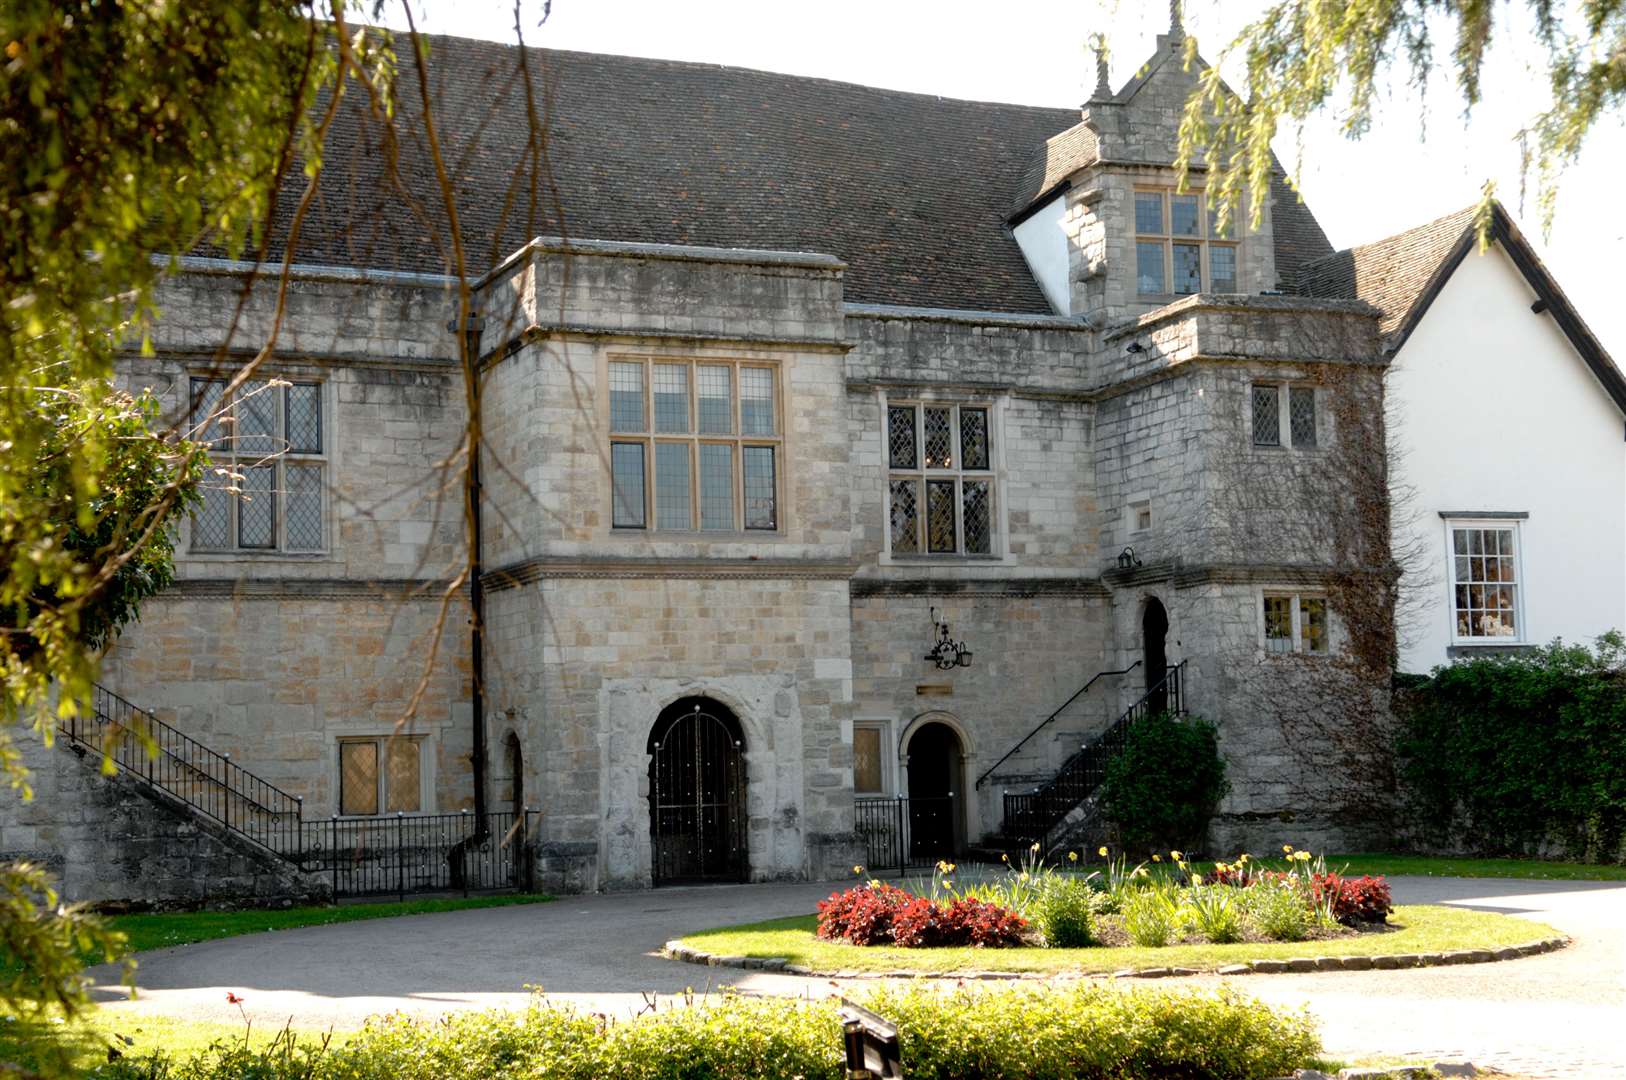 The Archbishop's Palace, Maidstone. Picture: Matthew Walker